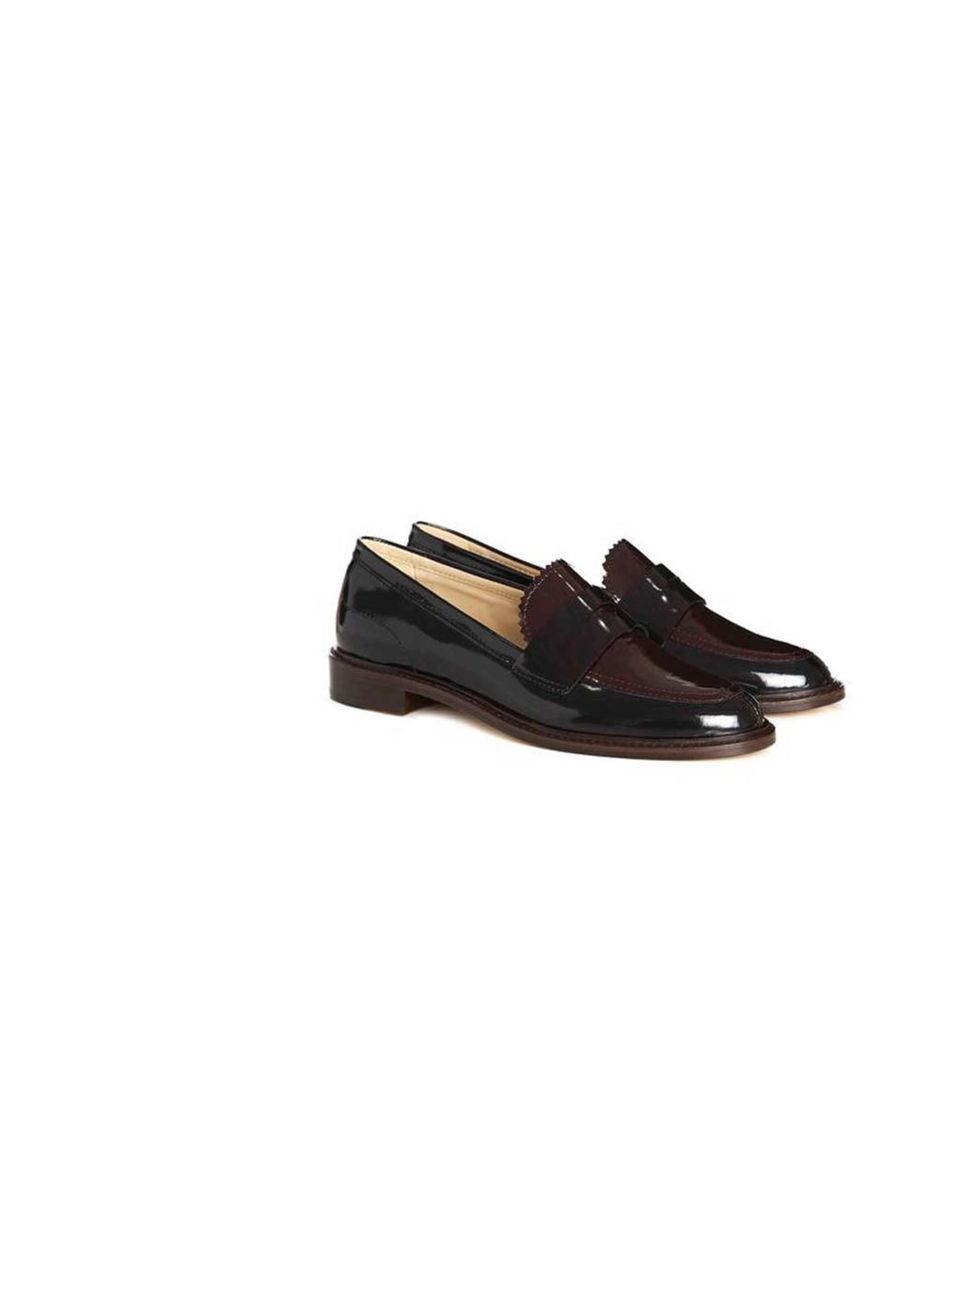 <p>The s/s 2014 catwalks were awash with flat shoes - and it's a trend we can't wait to wear! Get on board early with these glossy two-tone loafers.</p><p><a href="http://www.hobbs.co.uk/product/display?productID=0213-N1A4-006H025&productvarid=0213-N1A4-0